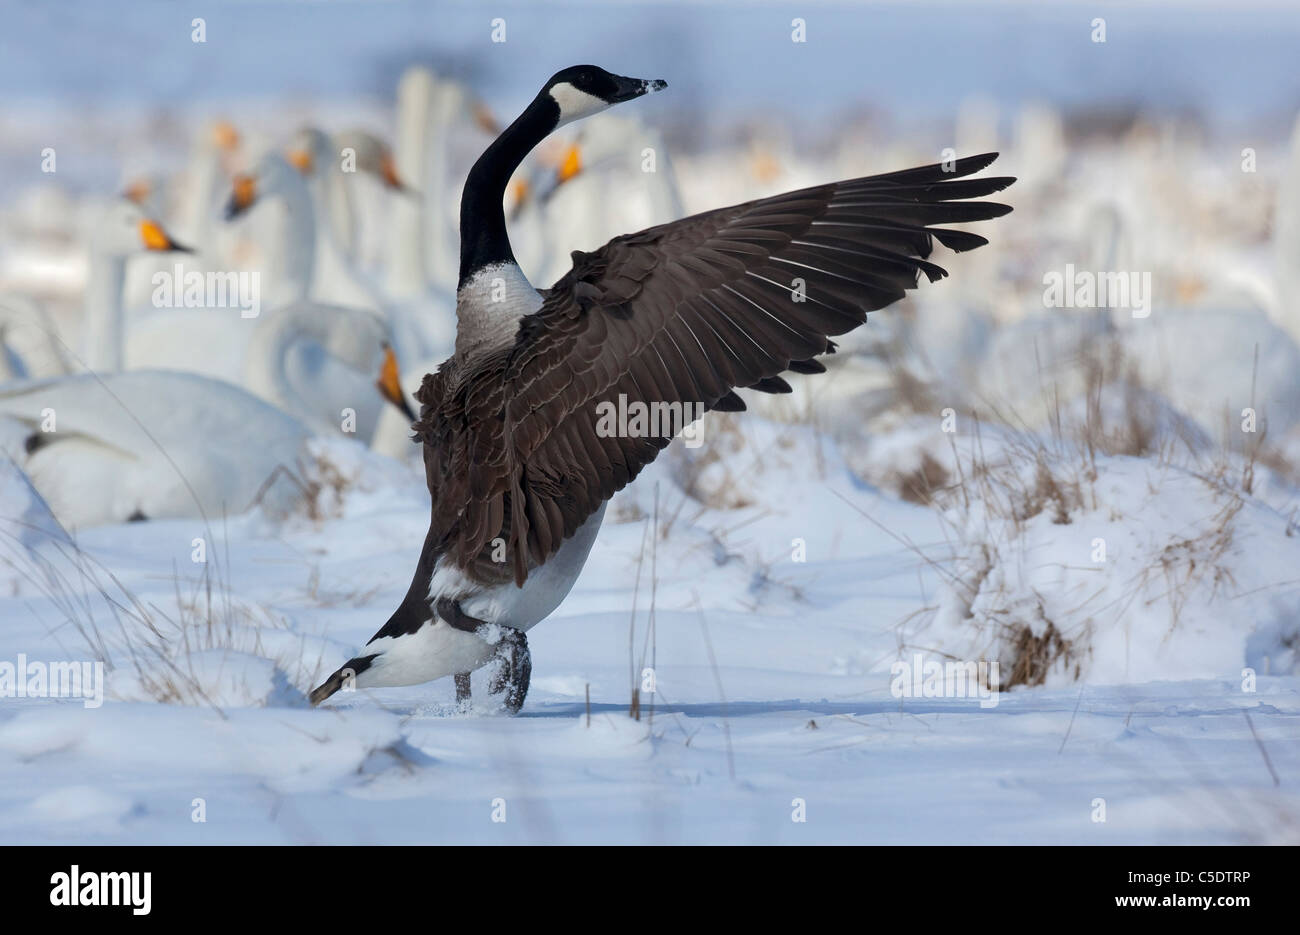 Canada Goose with spread wings and whooper swans on winter landscape Stock Photo